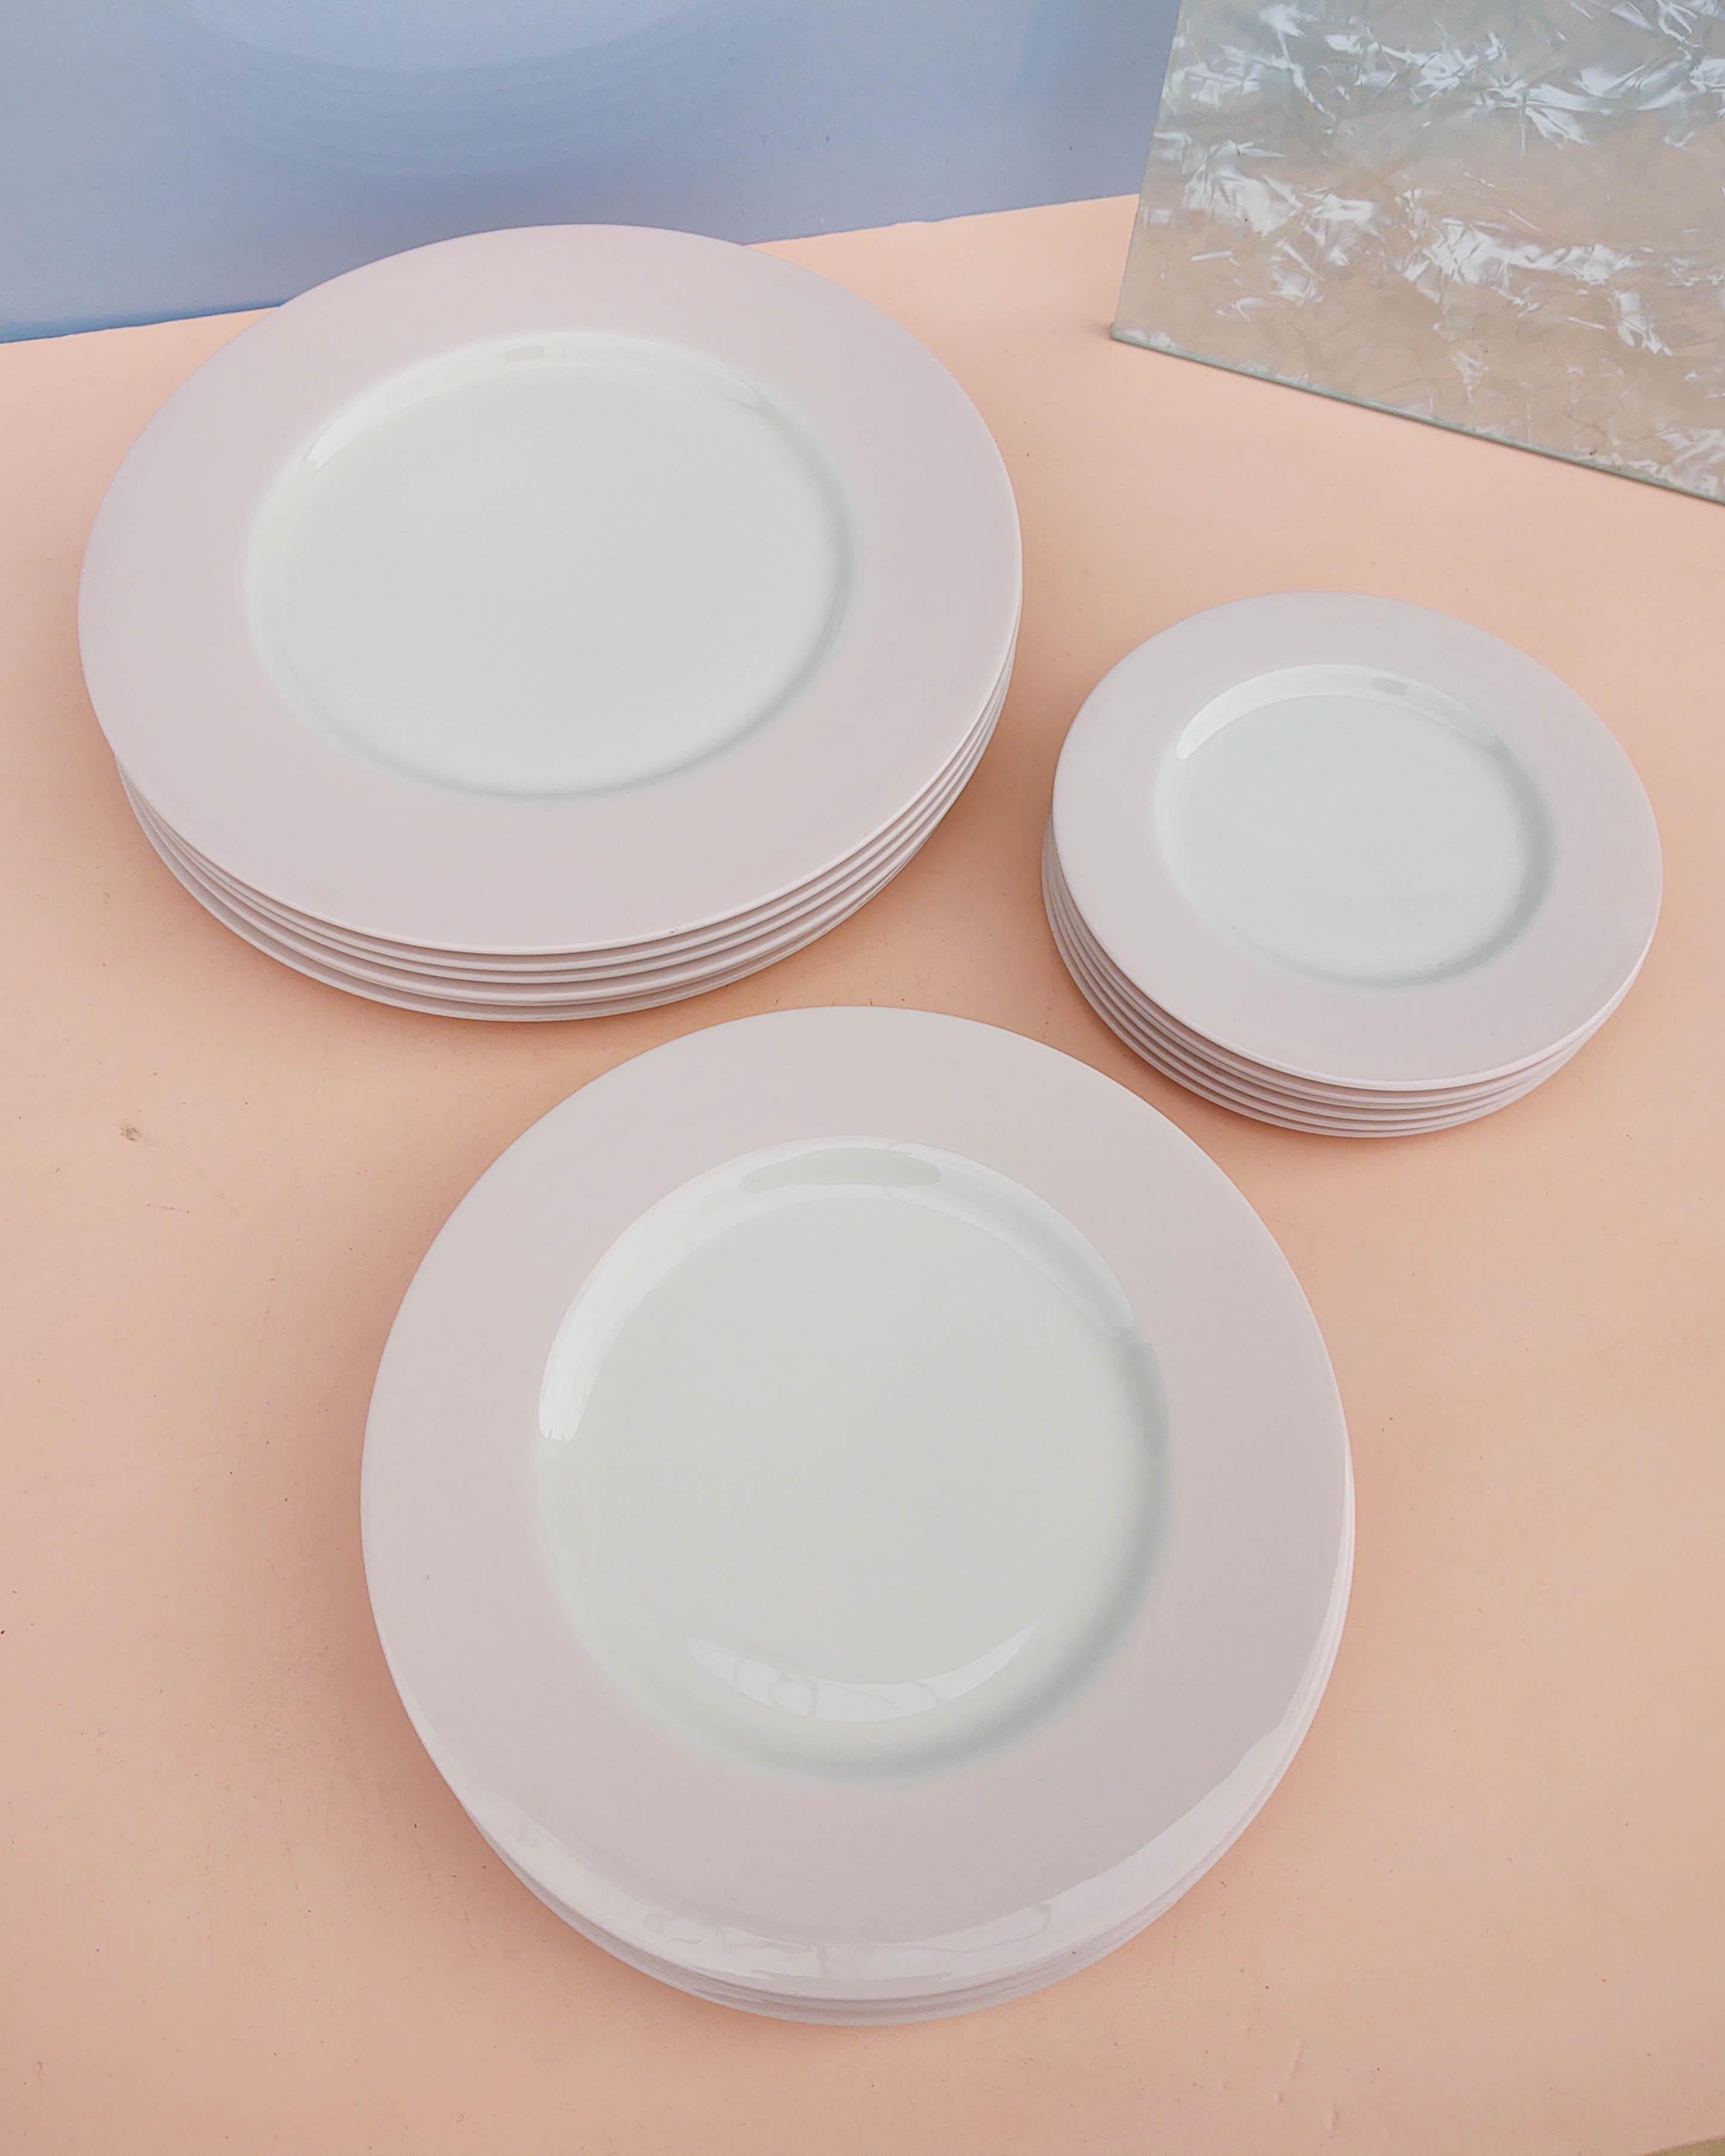 High quality porcelain dinnerware with soft pink border. Excellent vintage condition, some very light wear. Set for 6 (18 pieces), two settings available. No chips or cracks.

Measures: Dinner Plate
10.5